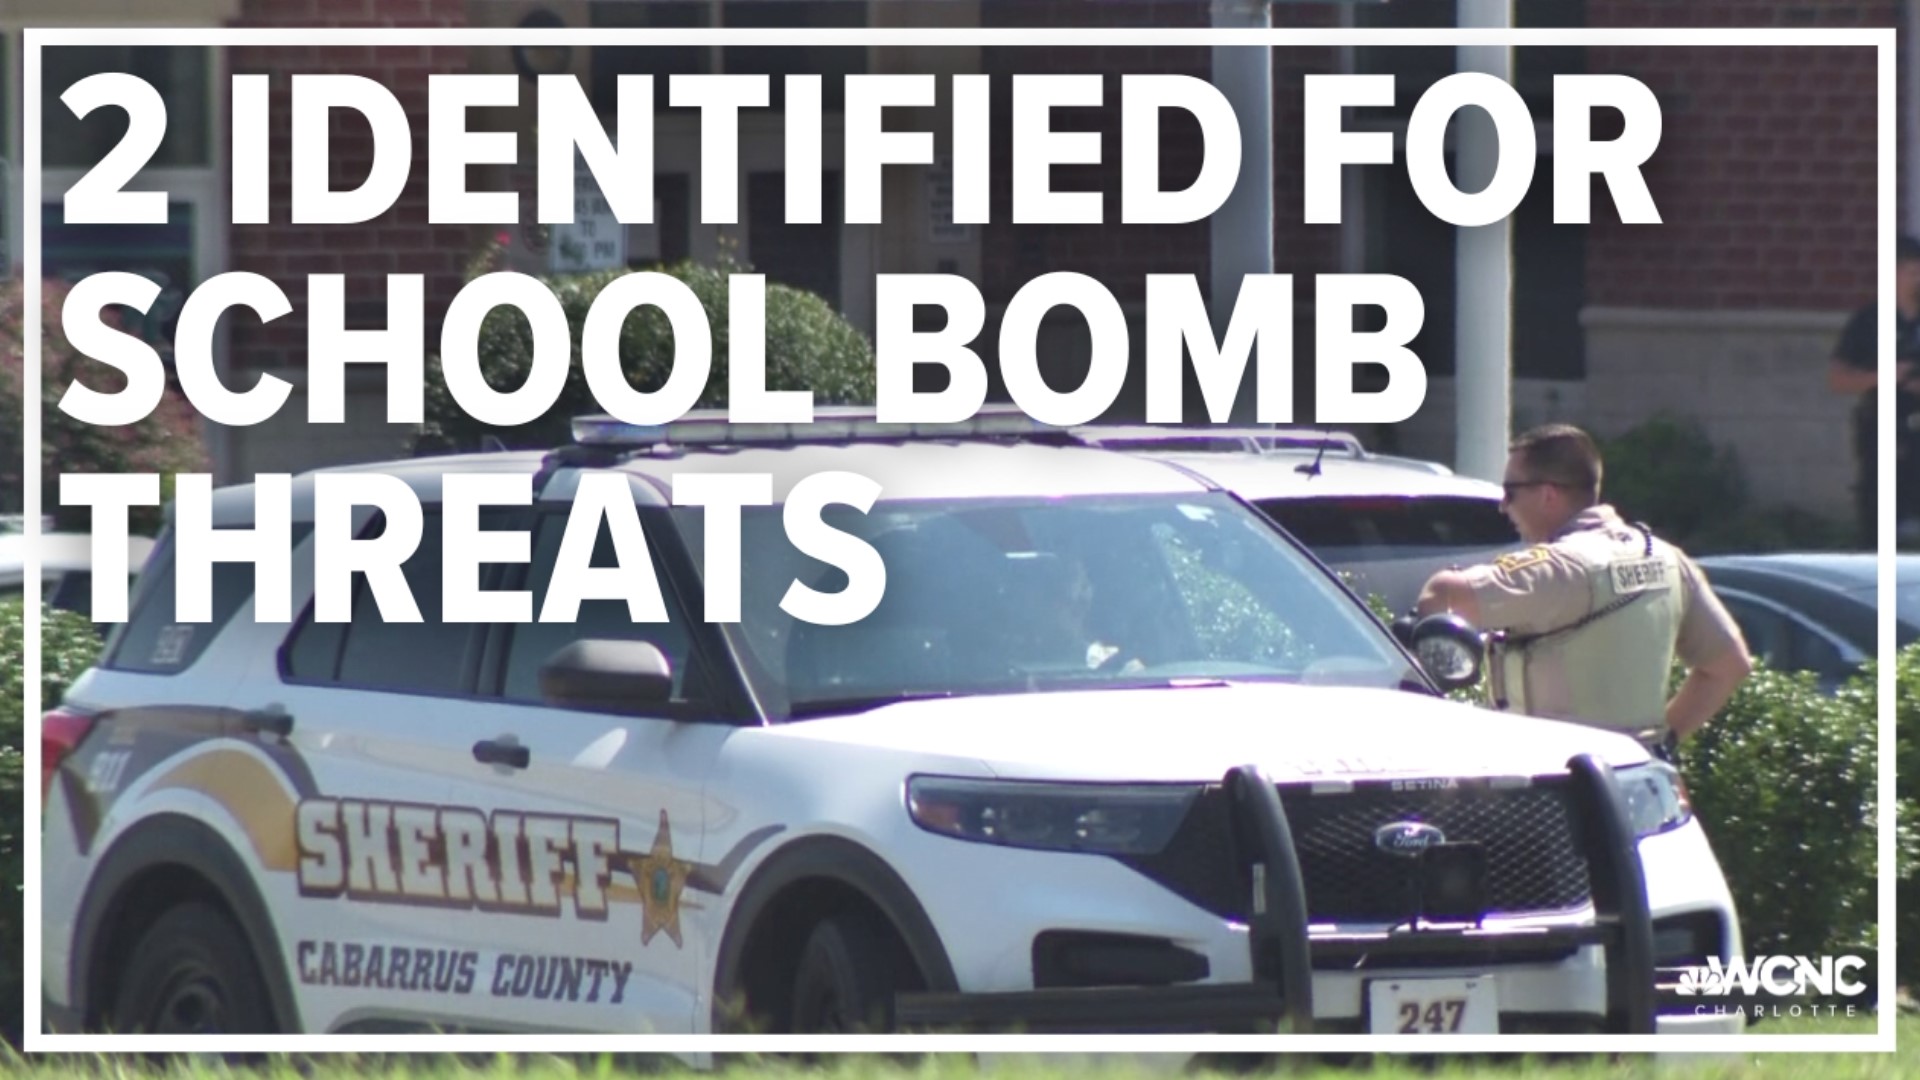 The Cabarrus County Sheriff's Office said a student will be charged in connection to bomb threats made this week.